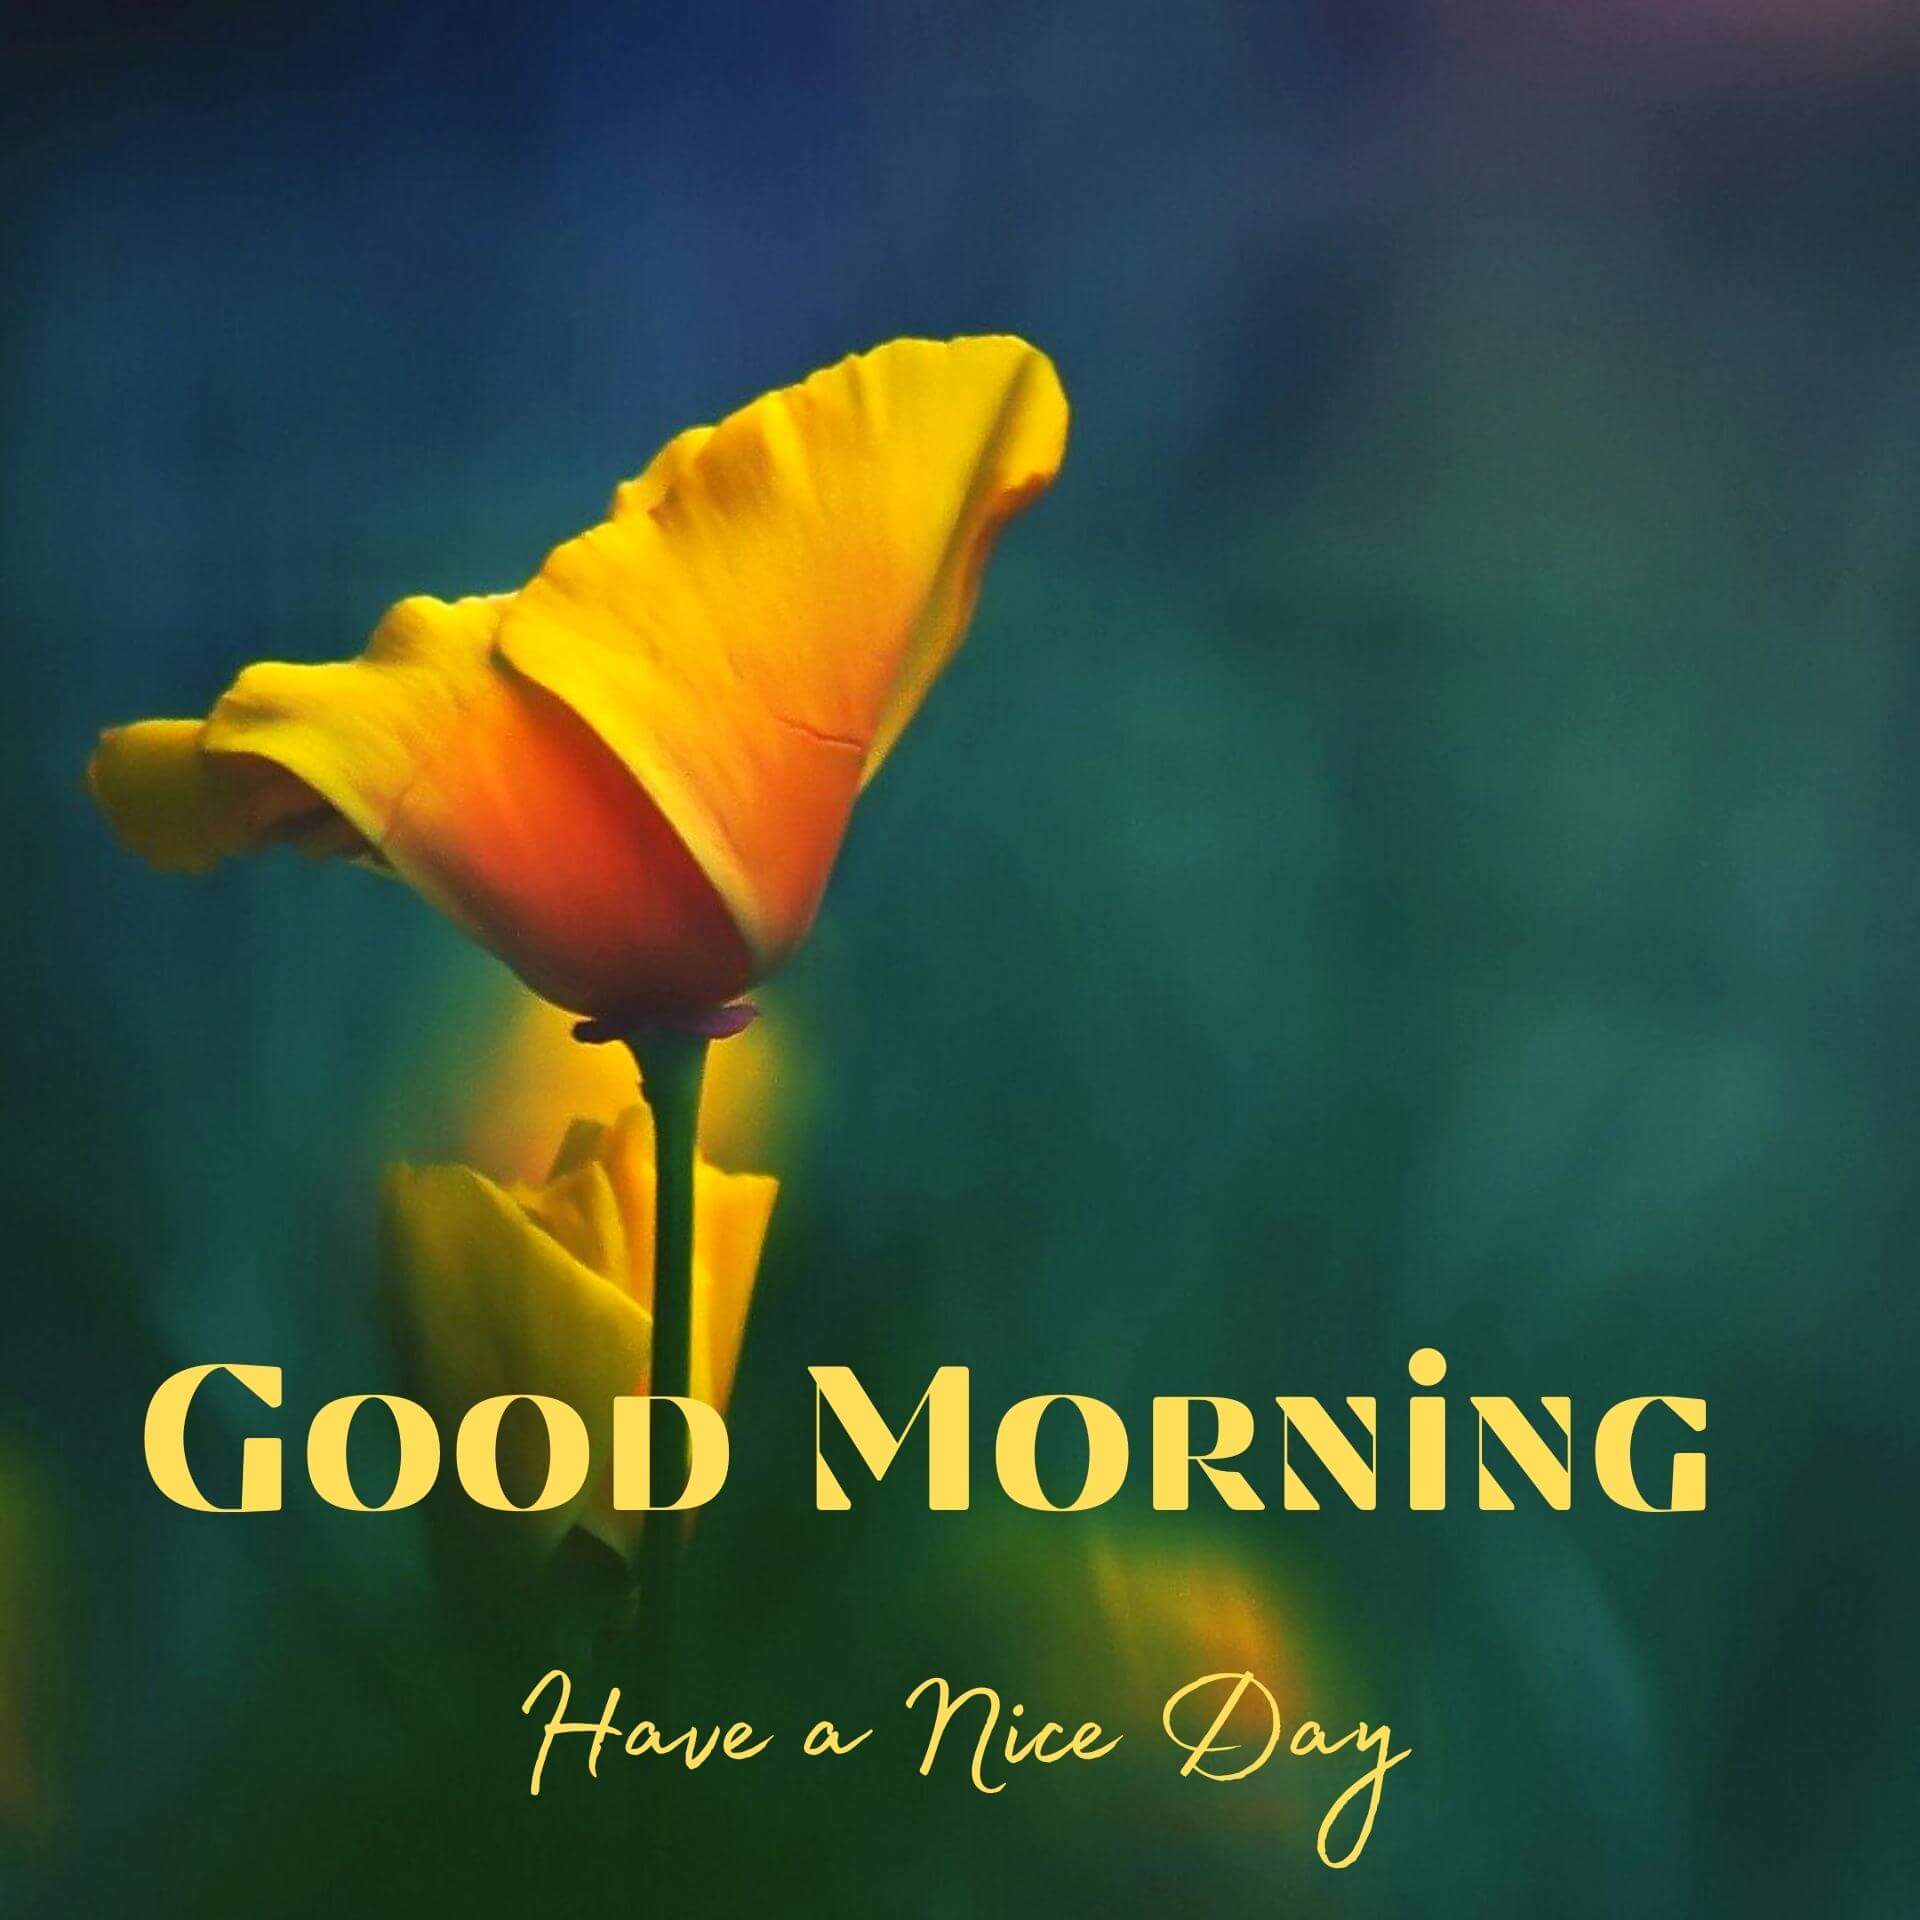 download good morning wishes